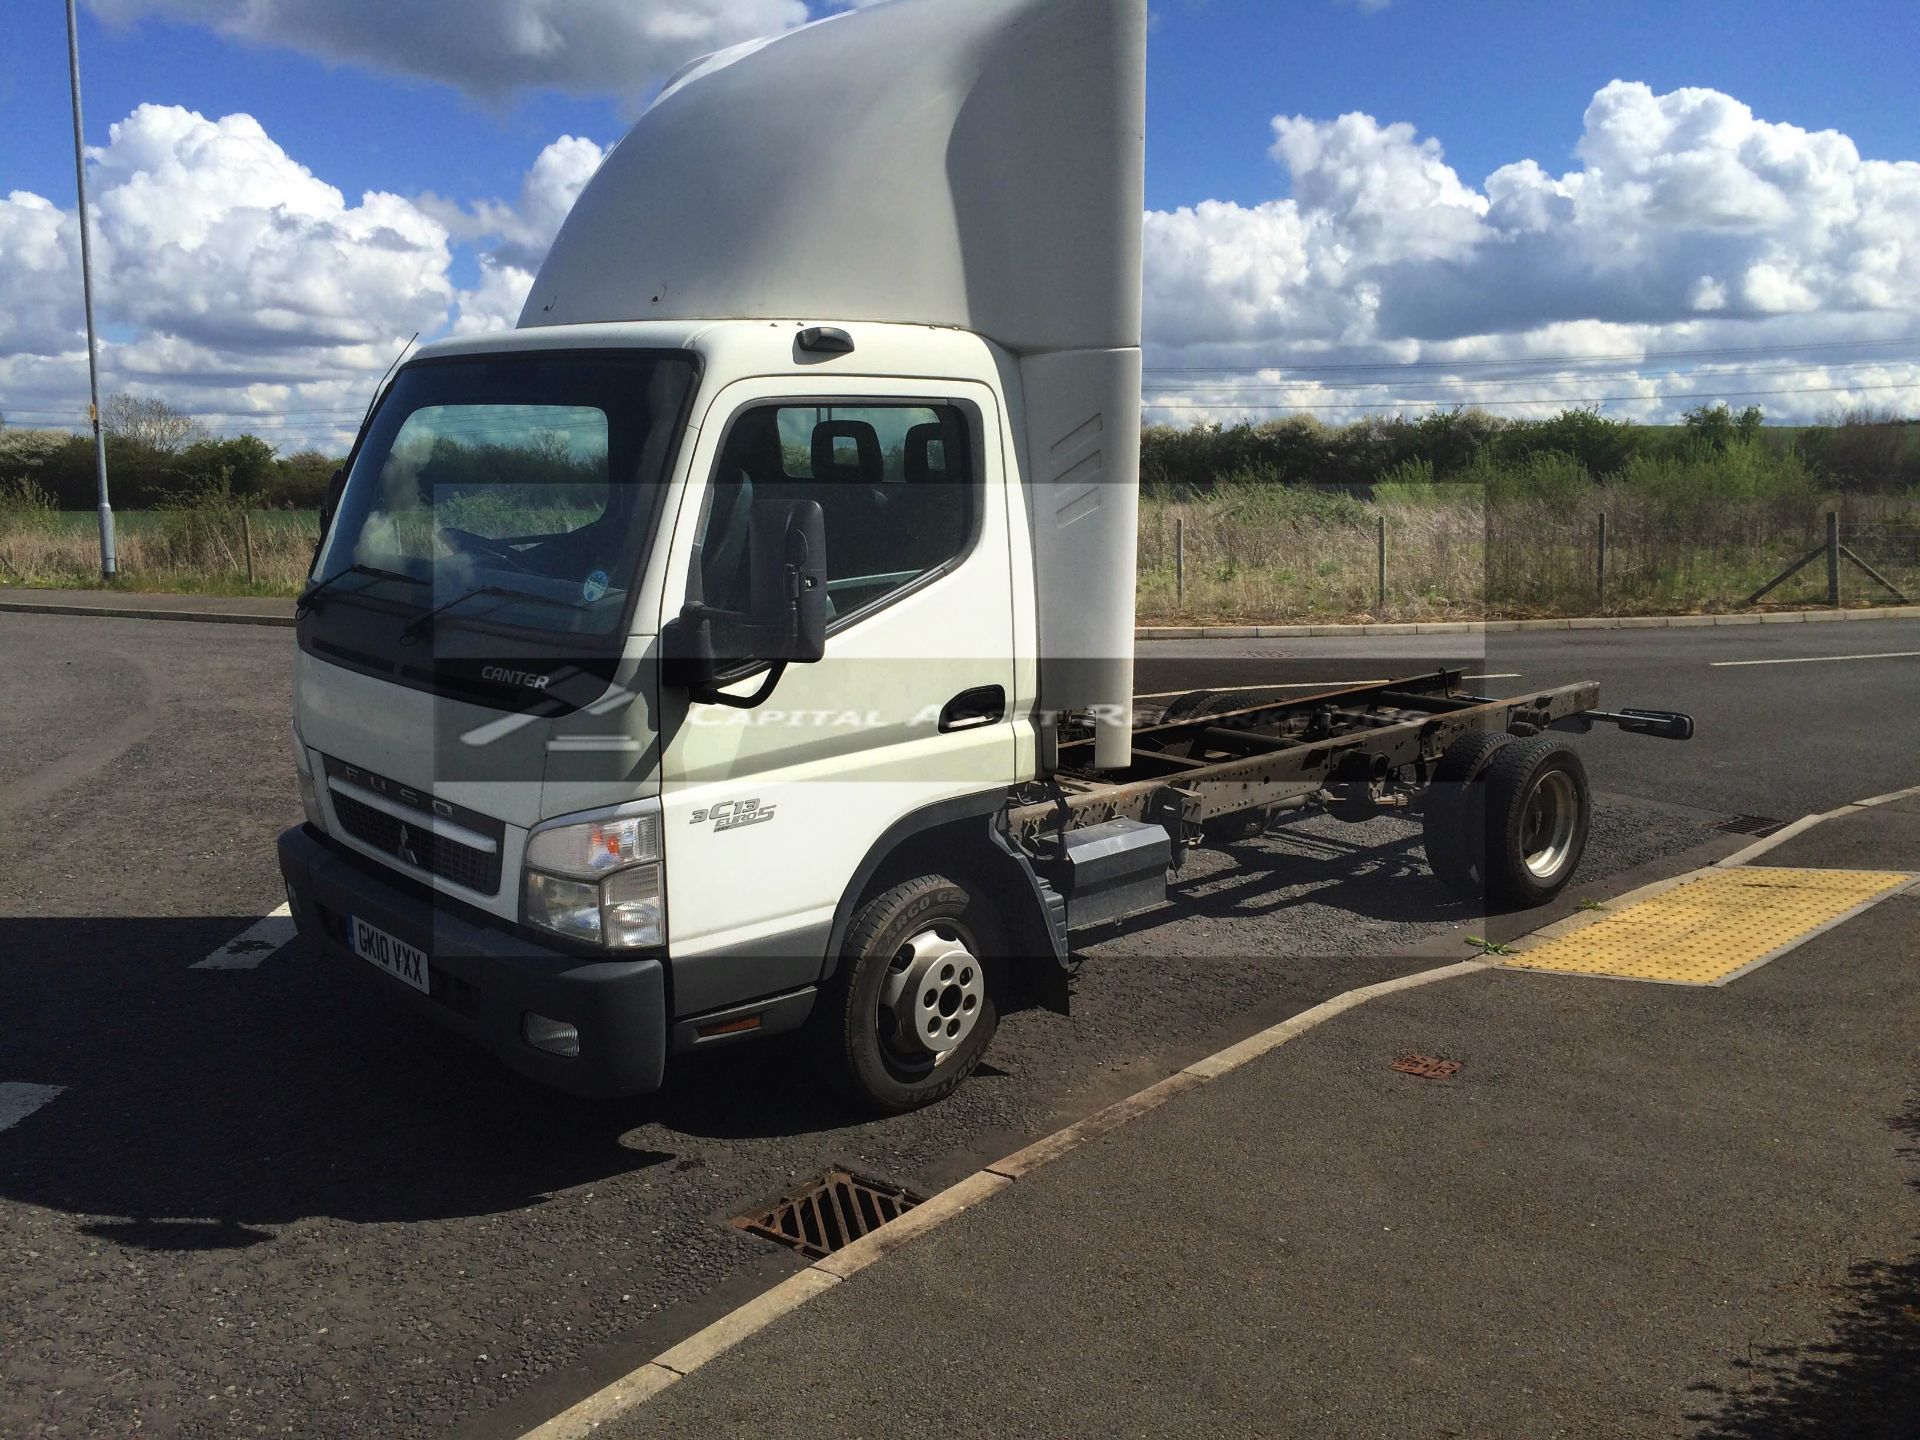 MITSUBISHI FUSO CANTER 3C13-34 (2010 - 10 REG) LWB (CAB & CHASSIS) **1 OWNER FROM NEW** (EURO 5) - Image 3 of 11